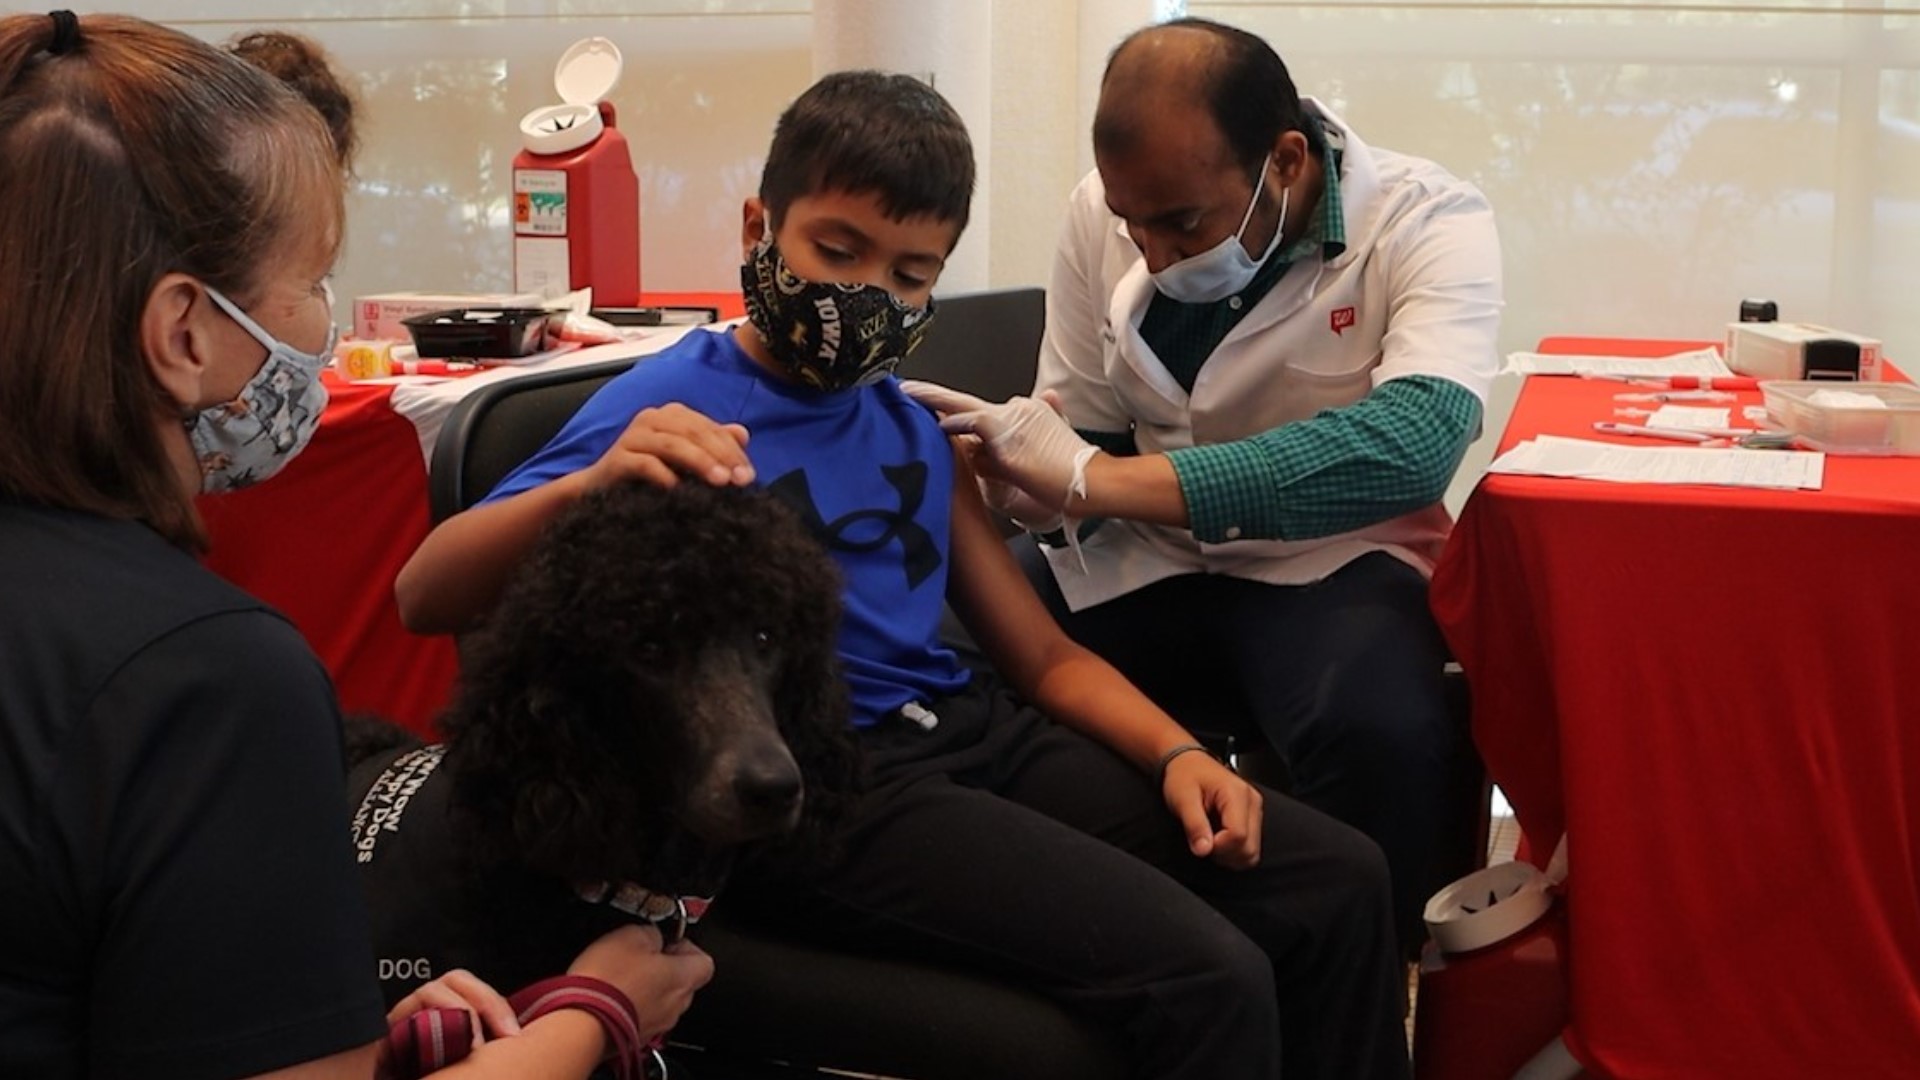 Furry friends were also in attendance to help the children getting shots feel safe and comfortable.